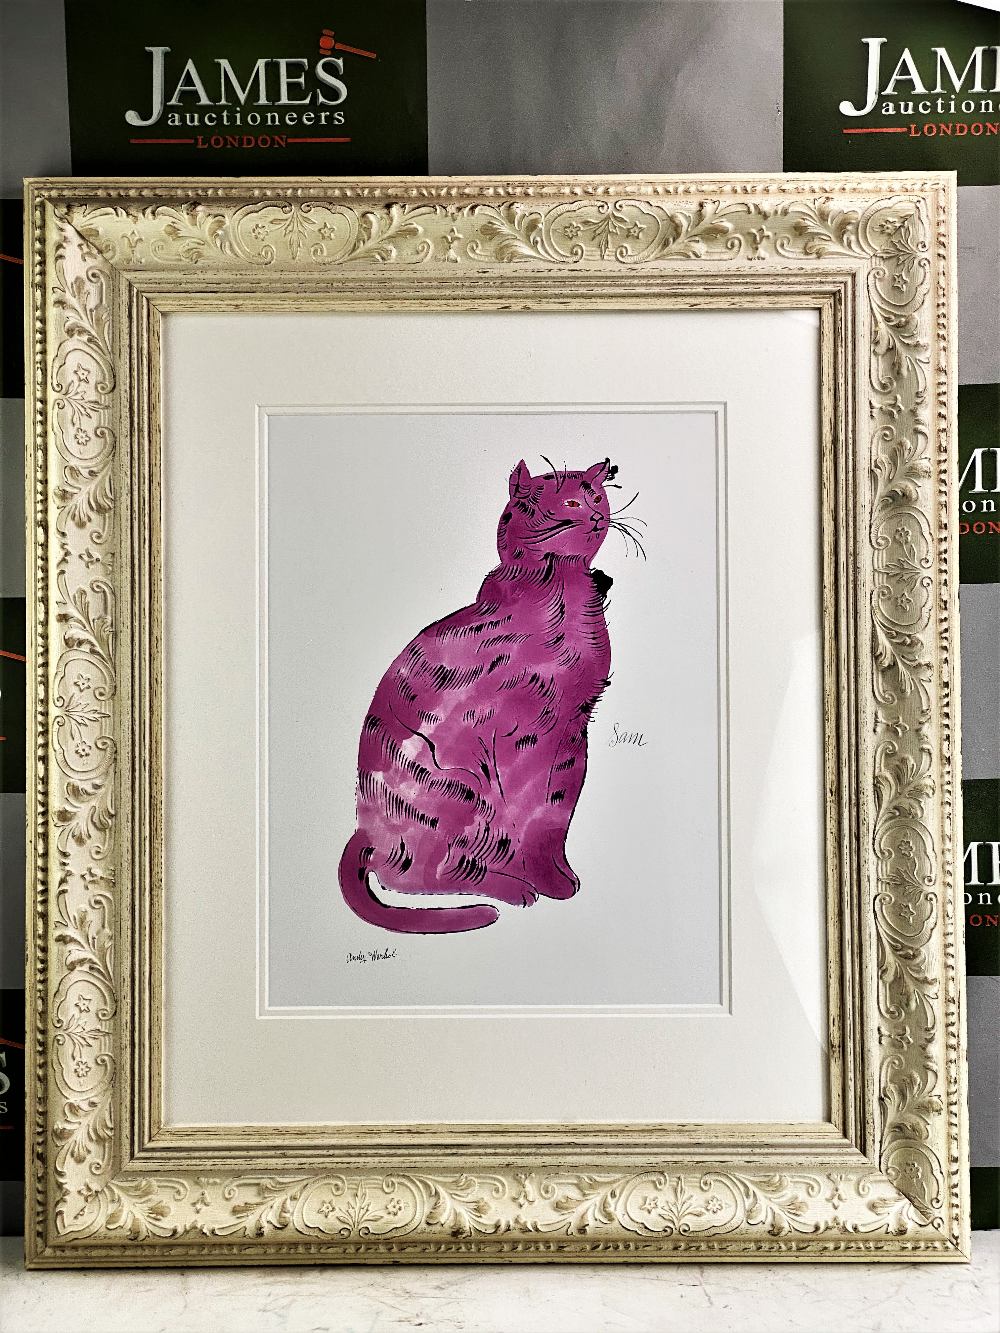 Andy Warhol "Pink Sam" 1954 Plate Signed Lithograph Print/Framed - Image 3 of 5